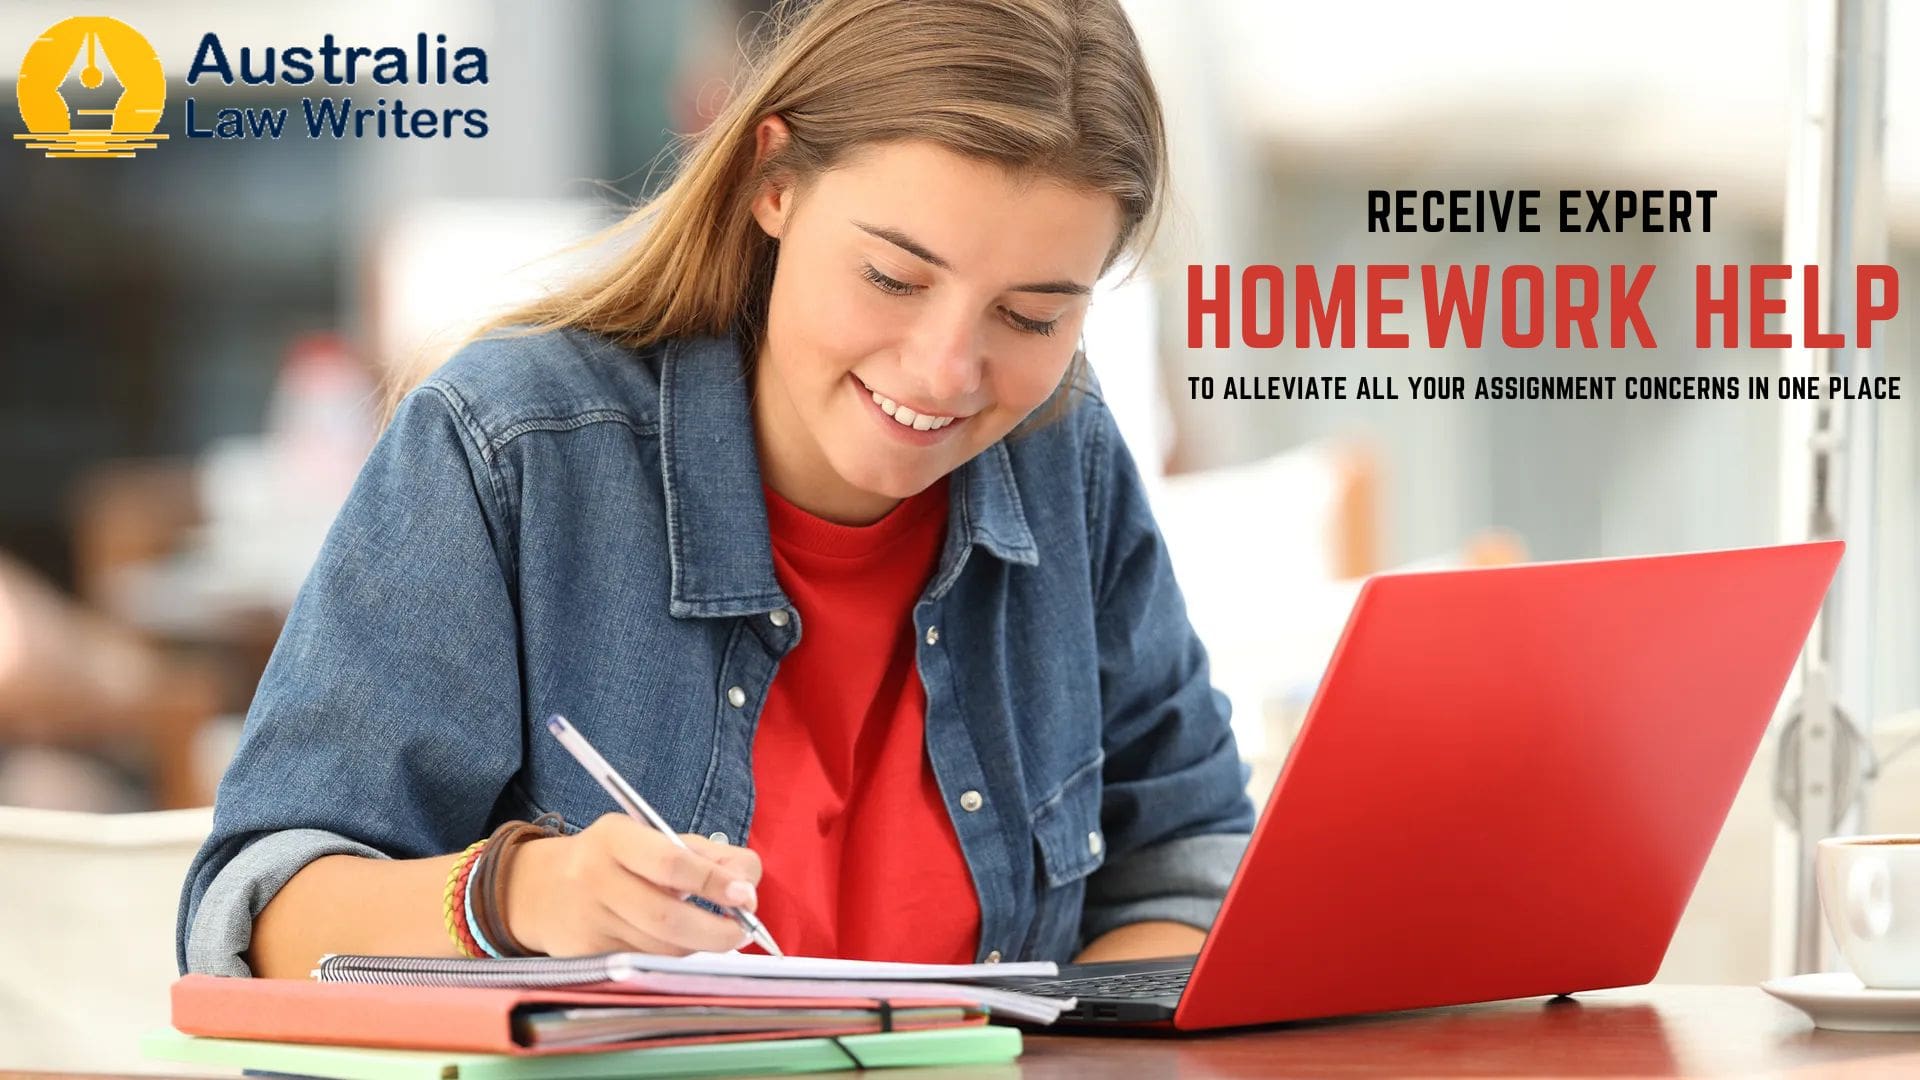 Receive expert homework help to alleviate all your assignment concerns in one place